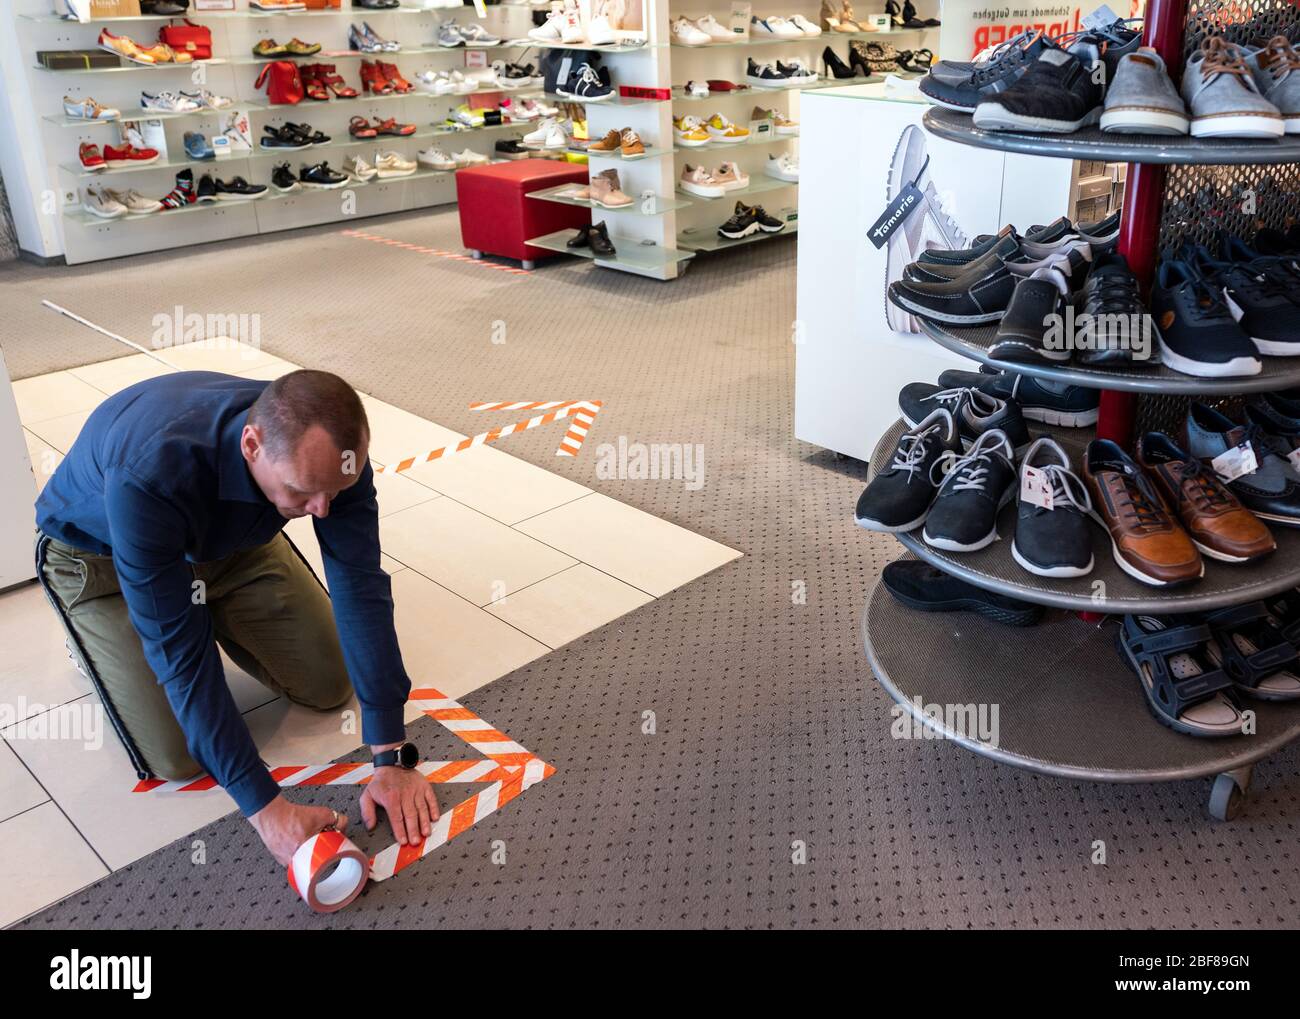 Soest, Germany. 17th Apr, 2020. Owner Marc Schreiber sticks arrows on the  floor at Schuhhaus Schreiber as a guidance system for customers. After the  long break due to the coronavirus pandemic, many